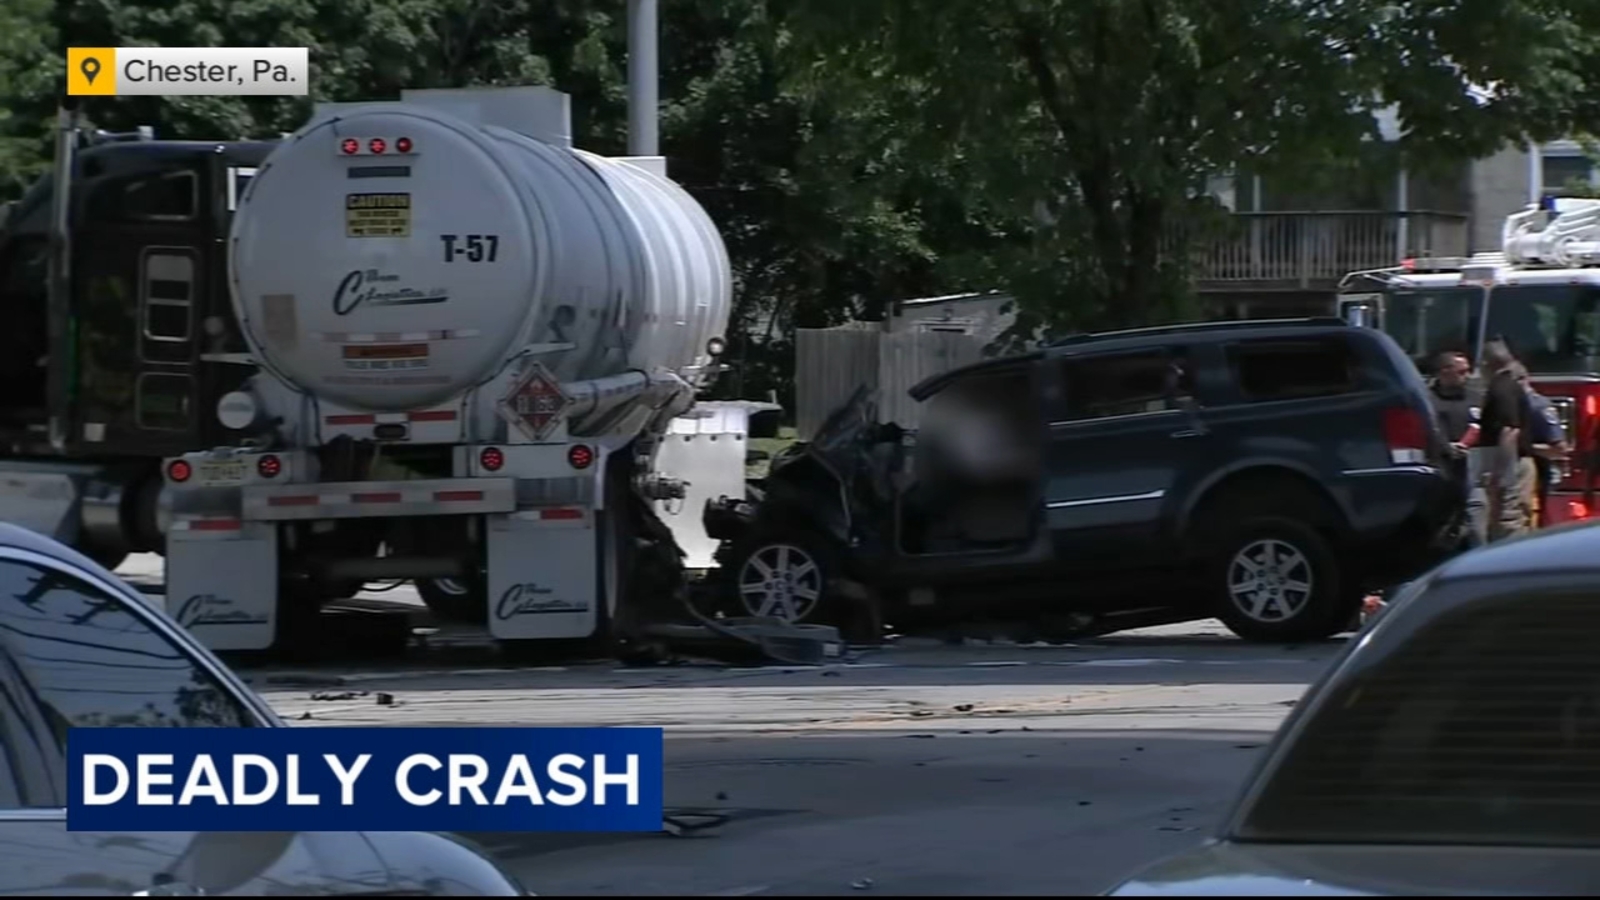 1 dead, 1 injured after car strikes tanker truck in Chester, Delaware County [Video]